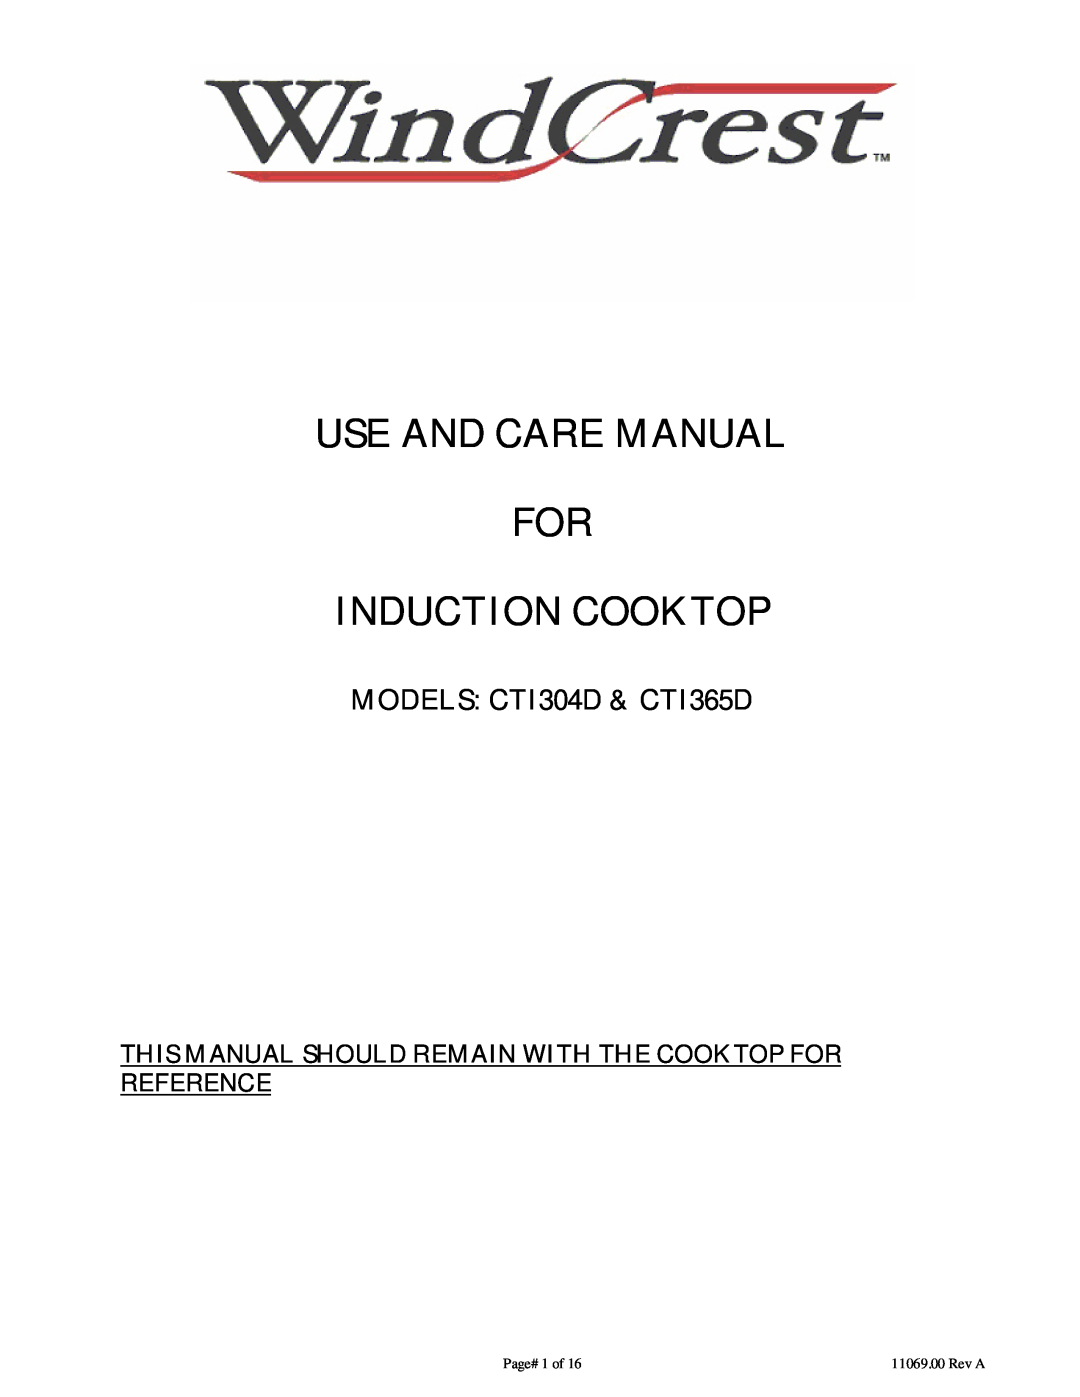 Wind Crest manual MODELS CTI304D & CTI365D, Use And Care Manual For Induction Cooktop, Page# 1 of, Rev A 